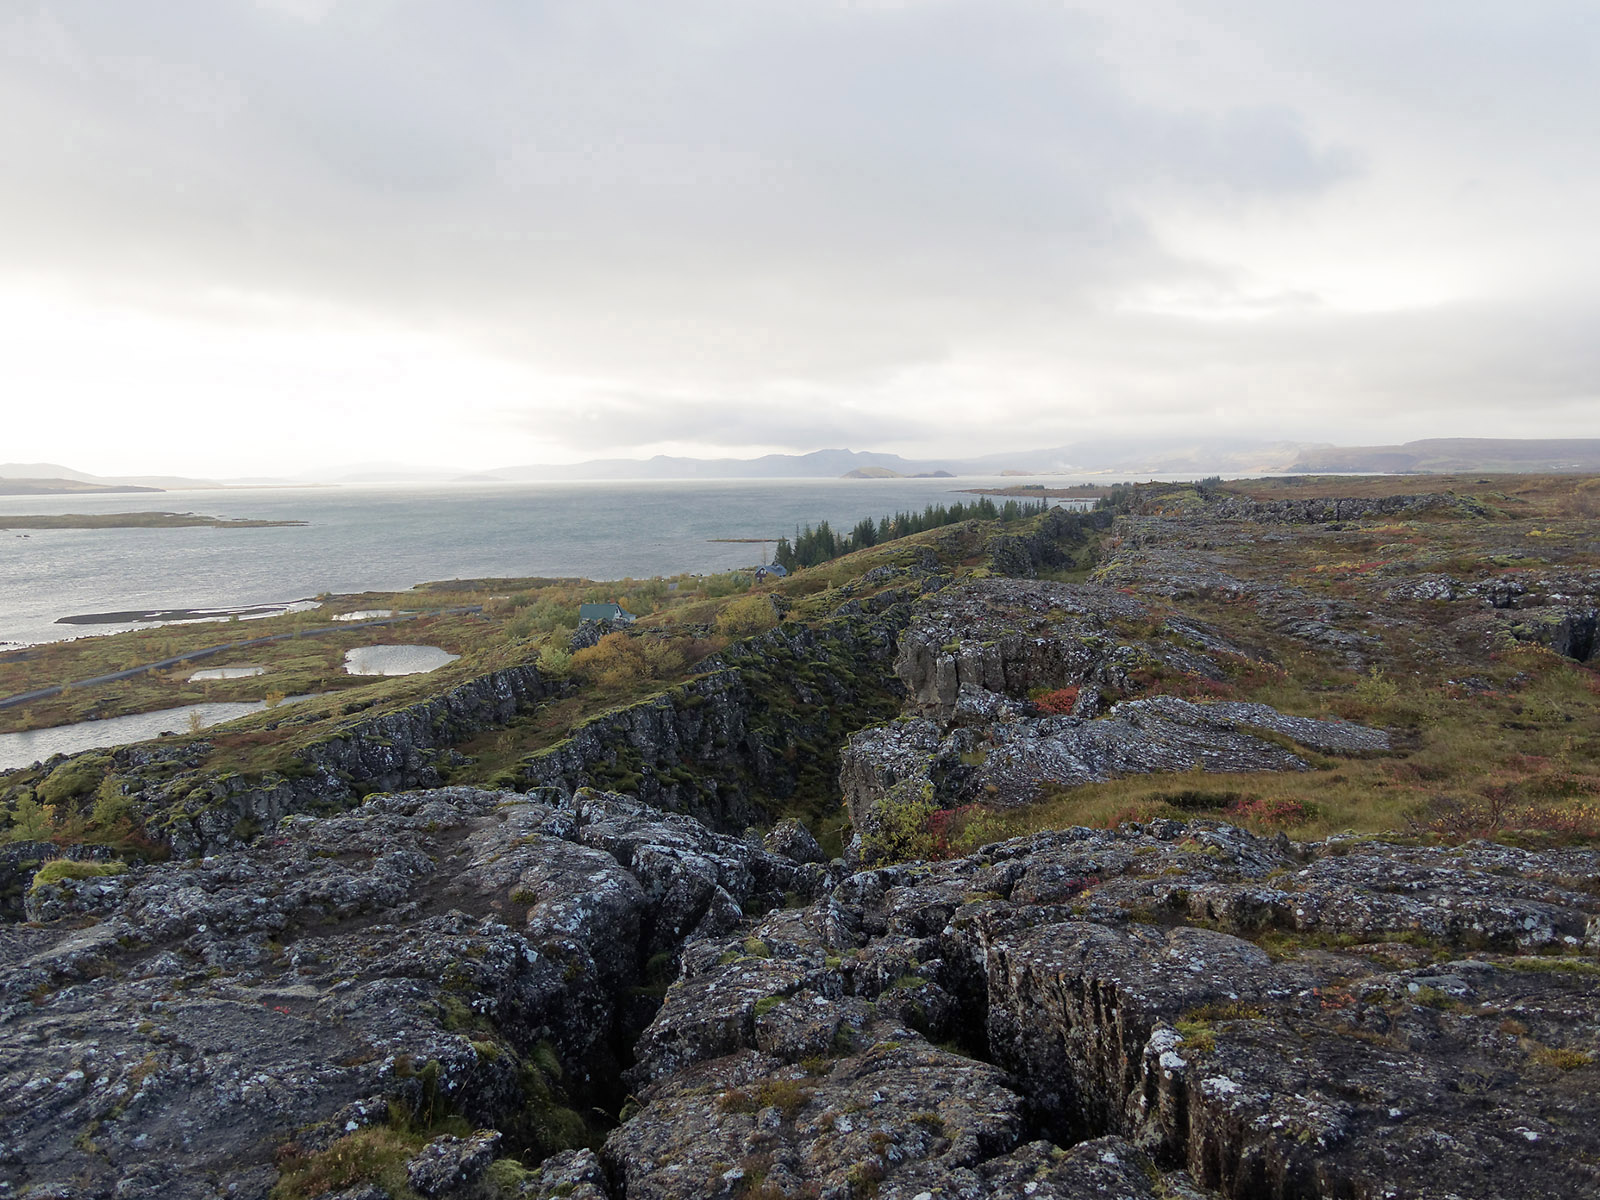 Þingvellir National Park Overlook at Almannagja (day 2): The view over Lake Þingvallavatn with interconnected faults in the lava fields on the bordering North American plate. Lava fields at Þingvellir have been radio-dated to be about 10,000 years old.